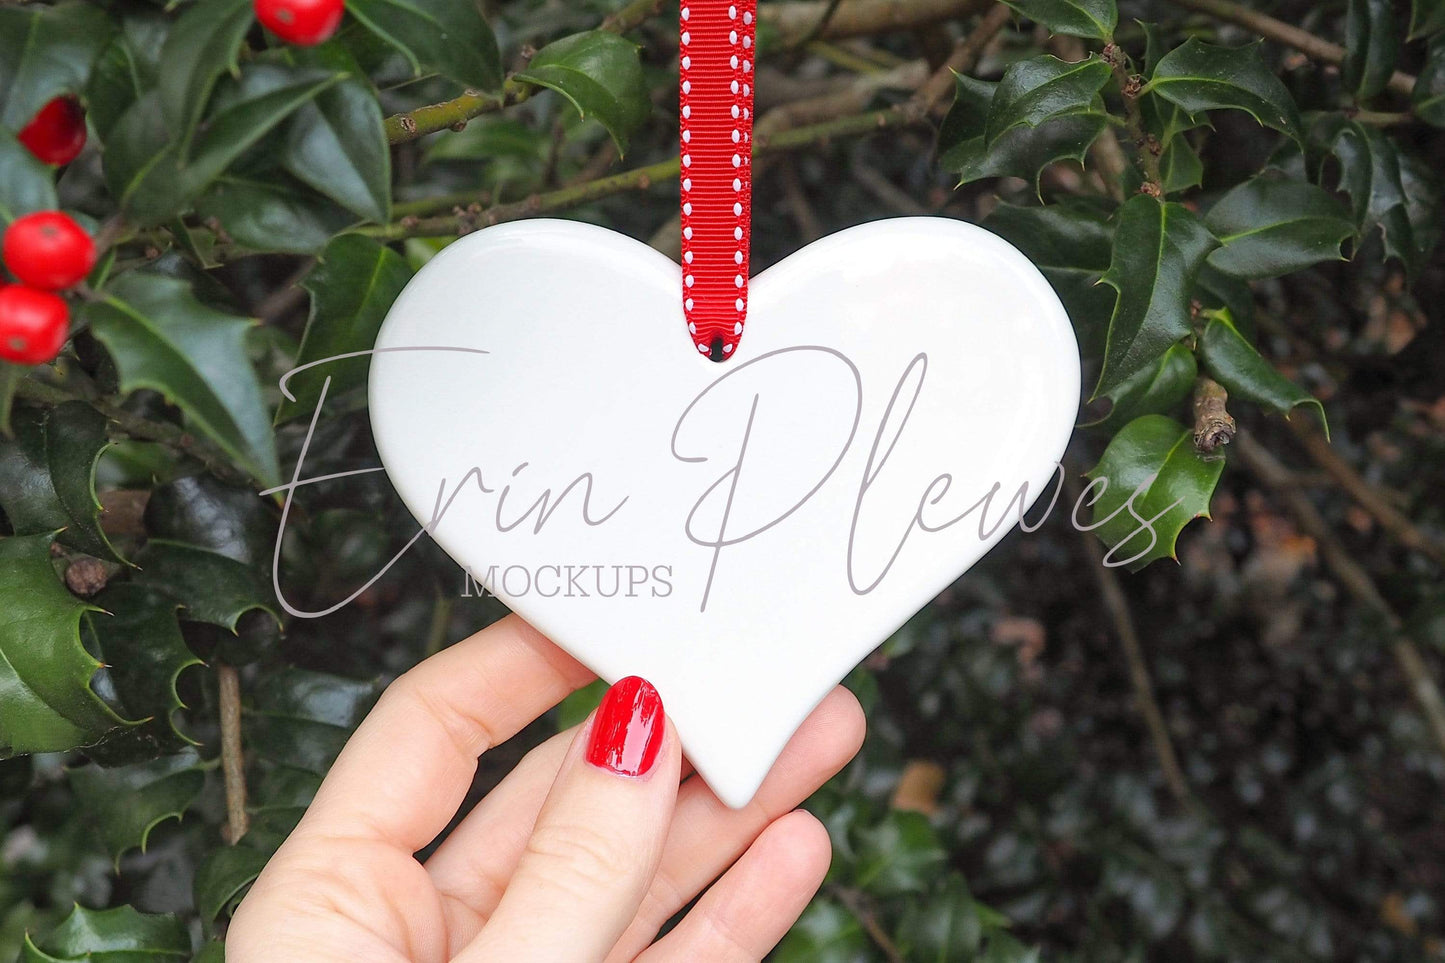 Erin Plewes Mockups Heart ornament mockup, blank holiday decoration mock-up for wedding lifestyle stock photography, JPG Instant Digital Download template